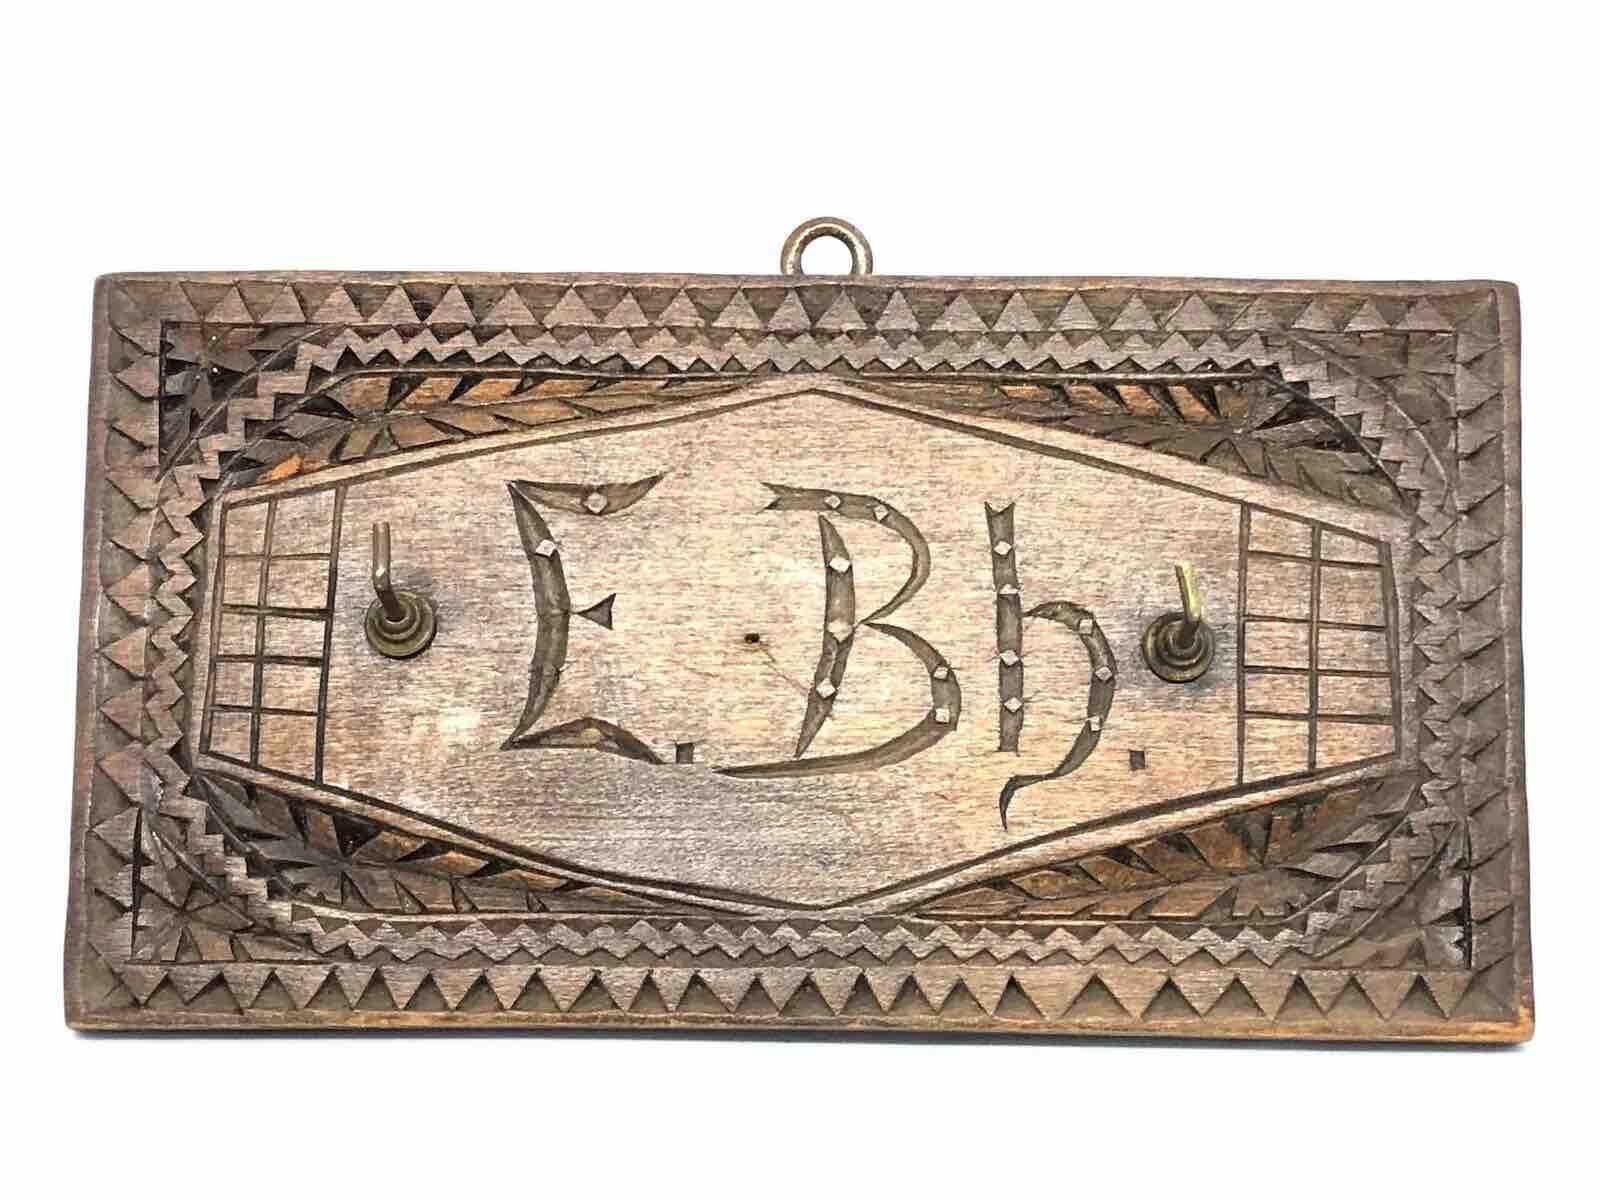 A lovely key hanger board made of hand carved wood, made in the black forest area in Germany. Found at an estate sale in Nuremberg, Germany. It is not marked. A nice addition to your collection. It is in very good as found condition. Metal with a